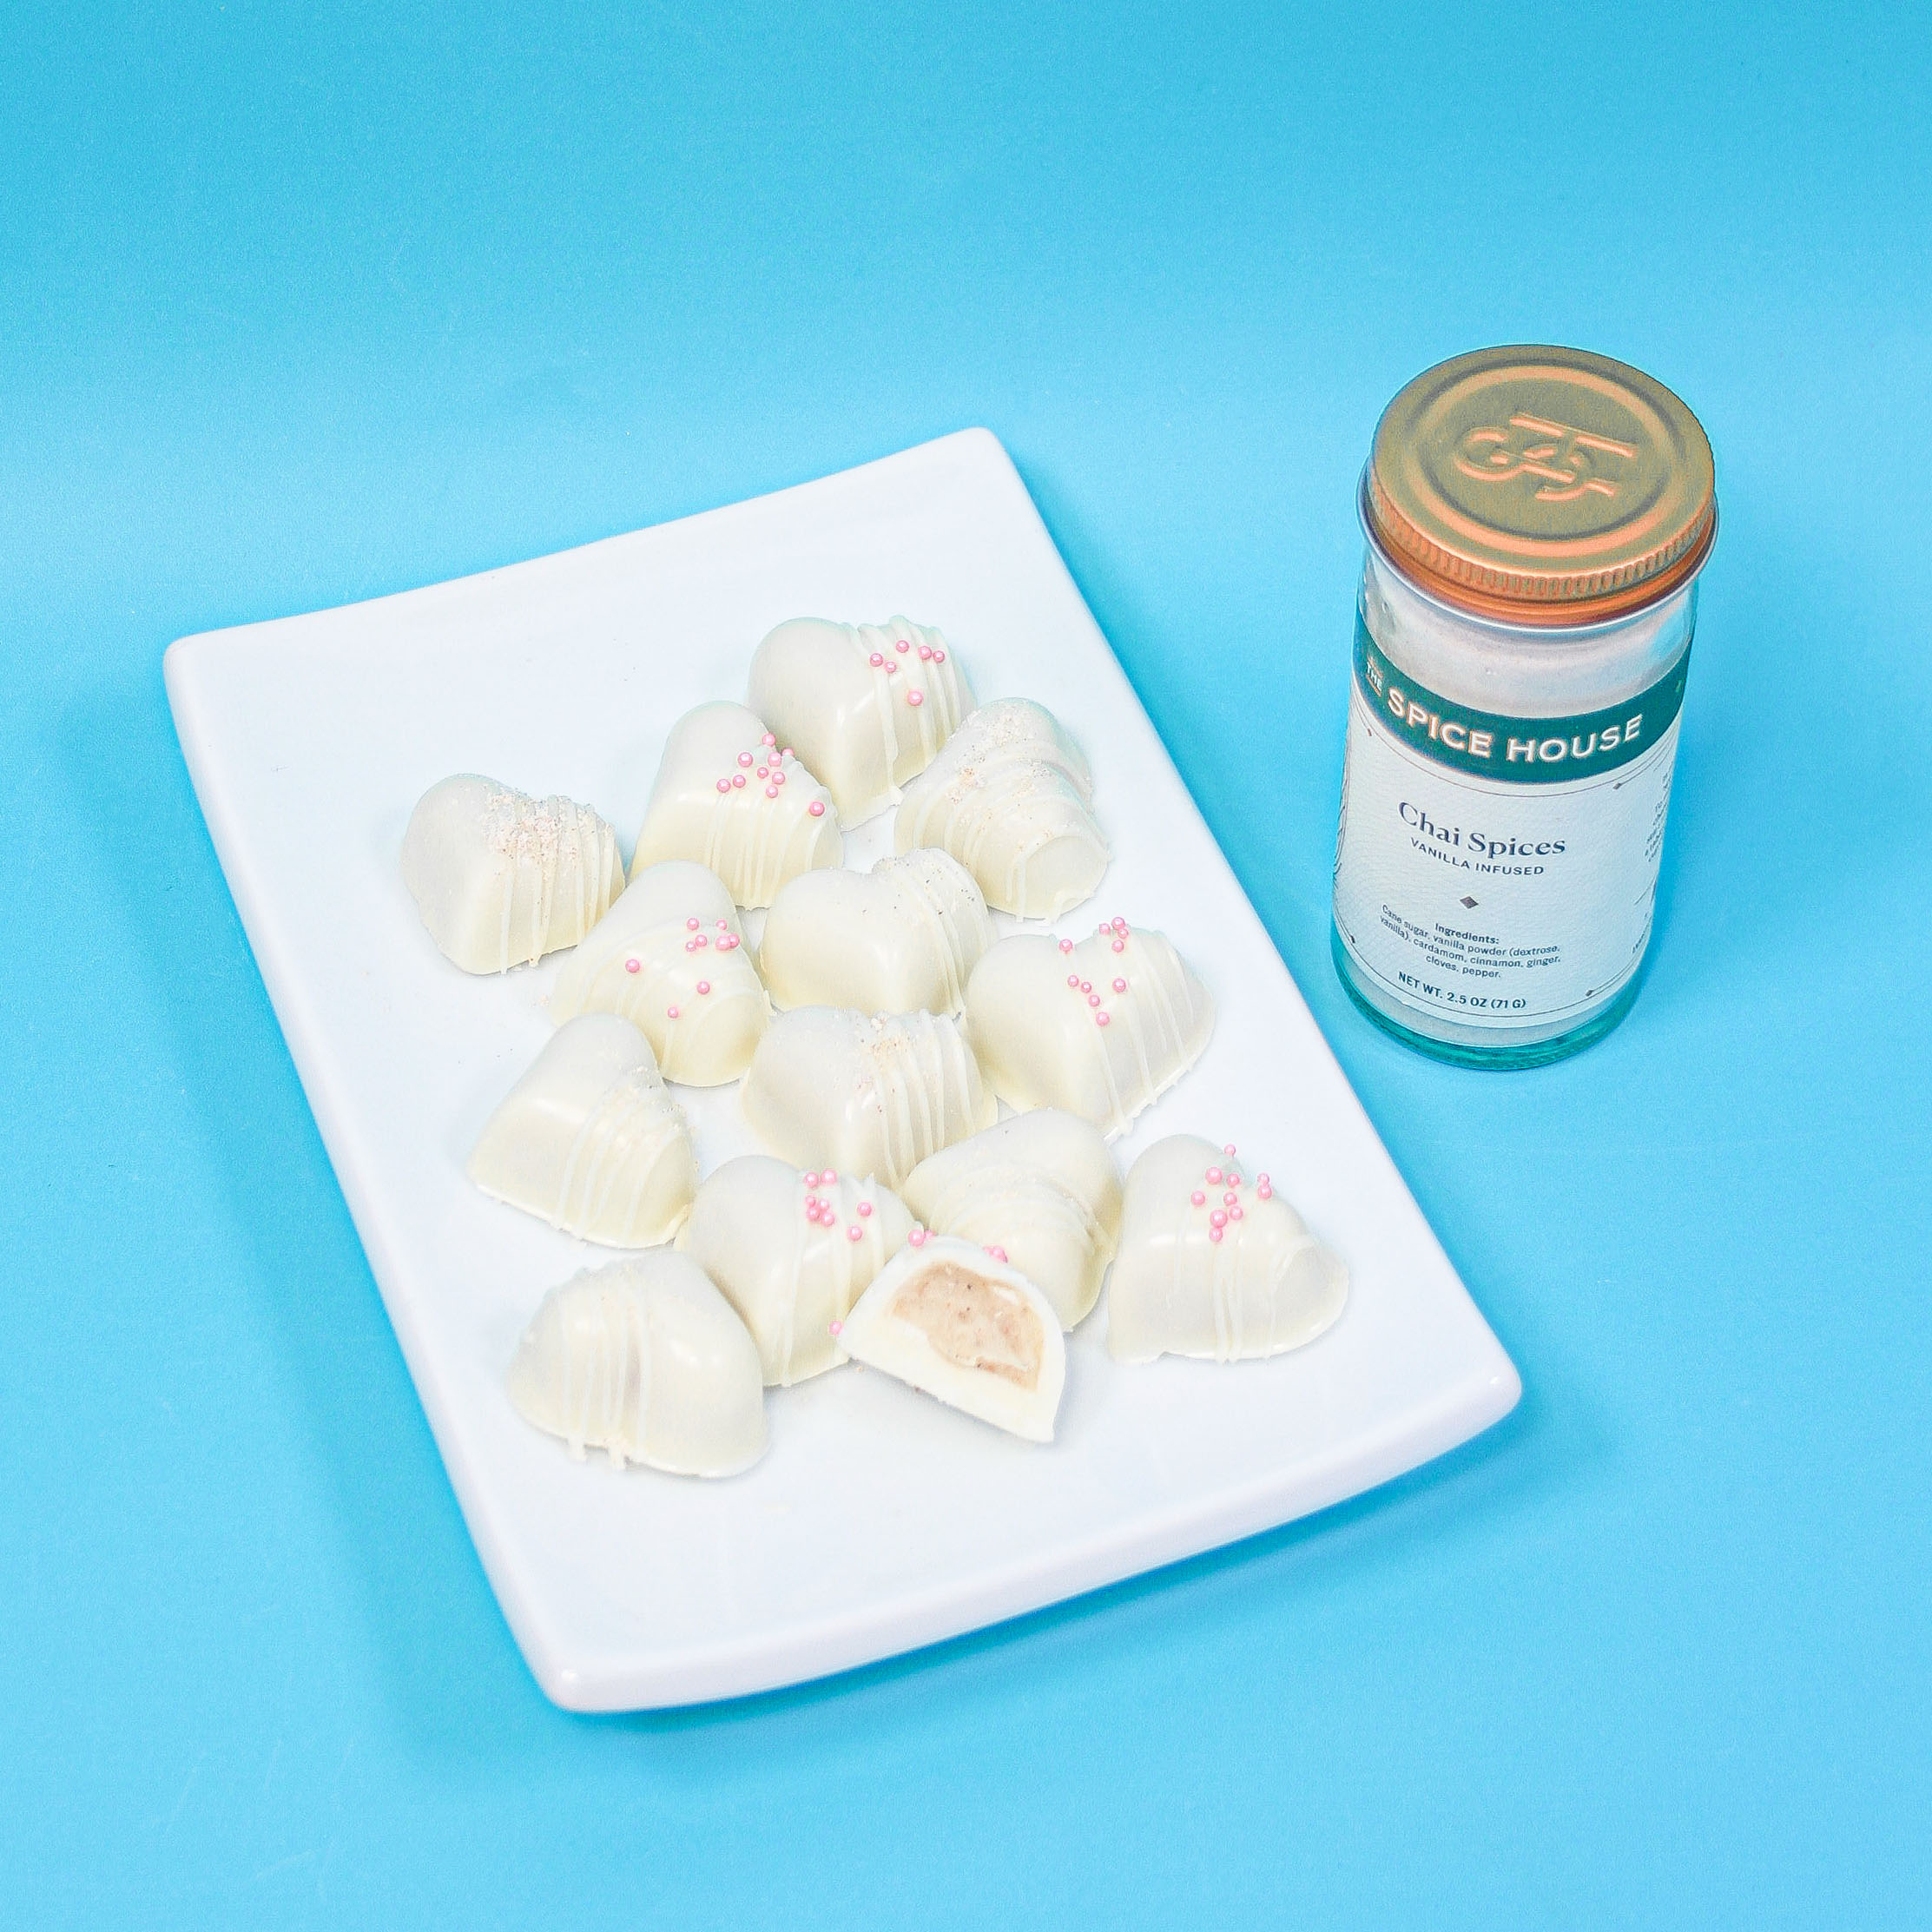 heart shaped chai turffles with white drizzle and pink nonpareils with a bottle of our vanilla infused chai spice.